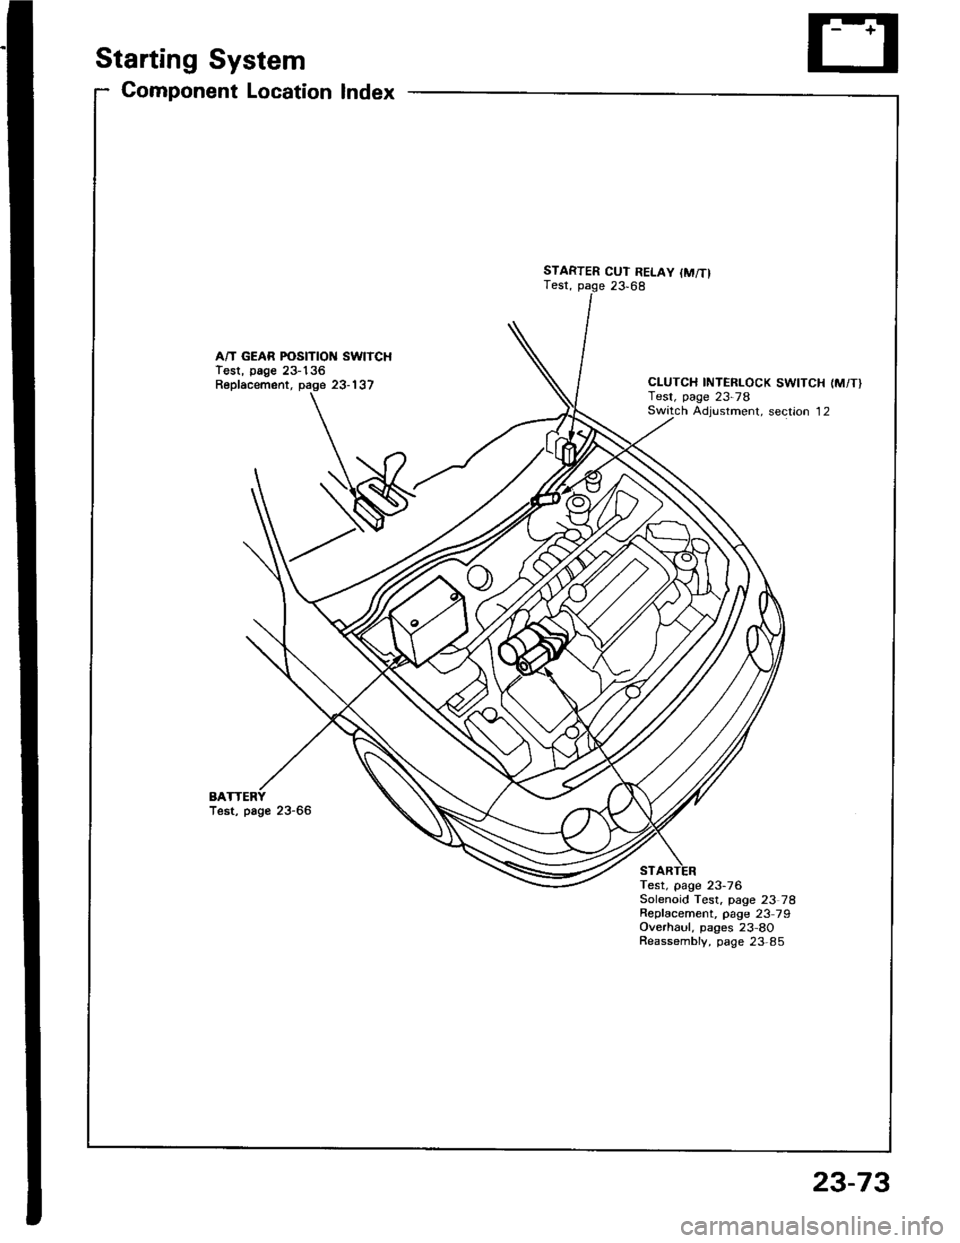 HONDA INTEGRA 1994 4.G User Guide Starting System
Gomponent Location Index
A/T GEAR POSITION SWITCHTest, page 23-136Replacement, page 23-137
BATest, page 23-66
STARTER CUT RELAY {M/T}Test, page 23,68
CLUTCH INTERLOCK SWITCH (M/T}Test,